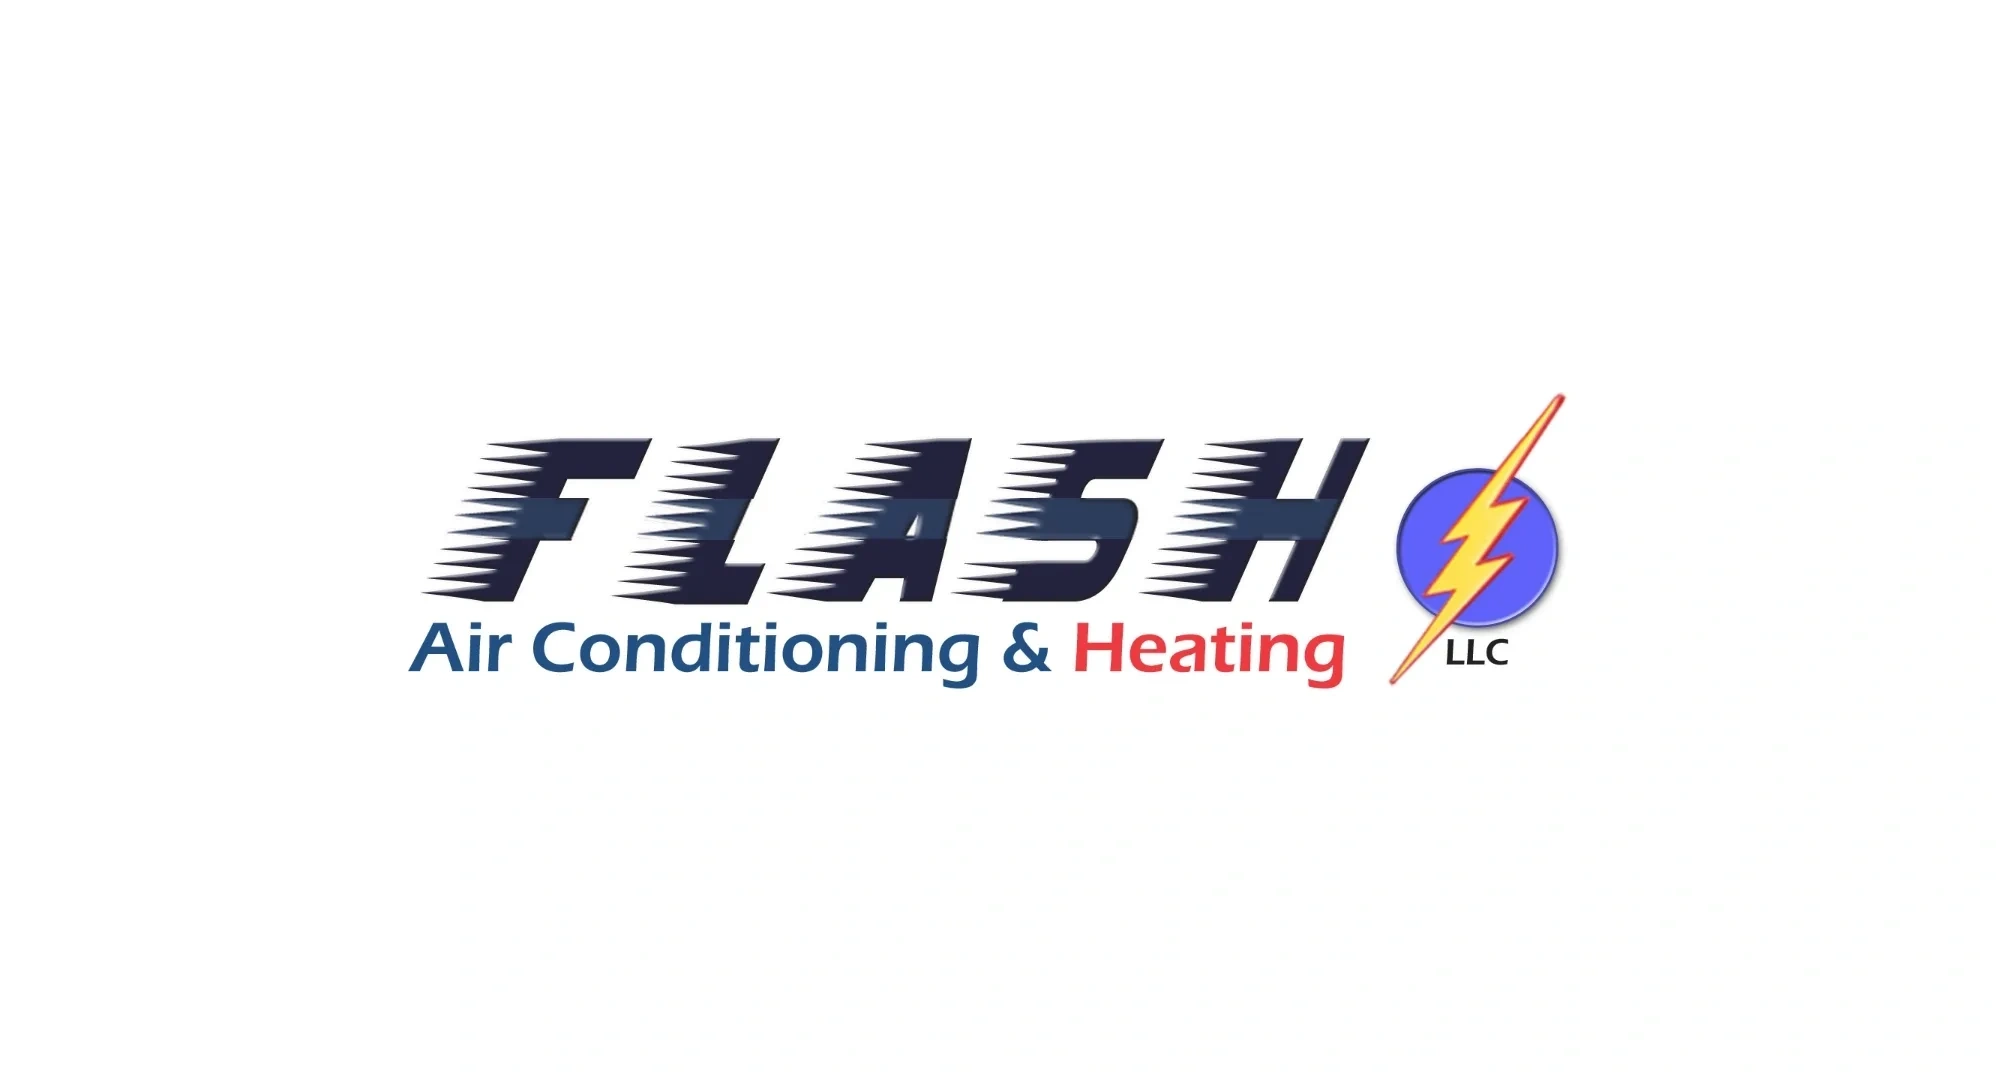 Air Conditioning Flash Air Conditioning and Heating